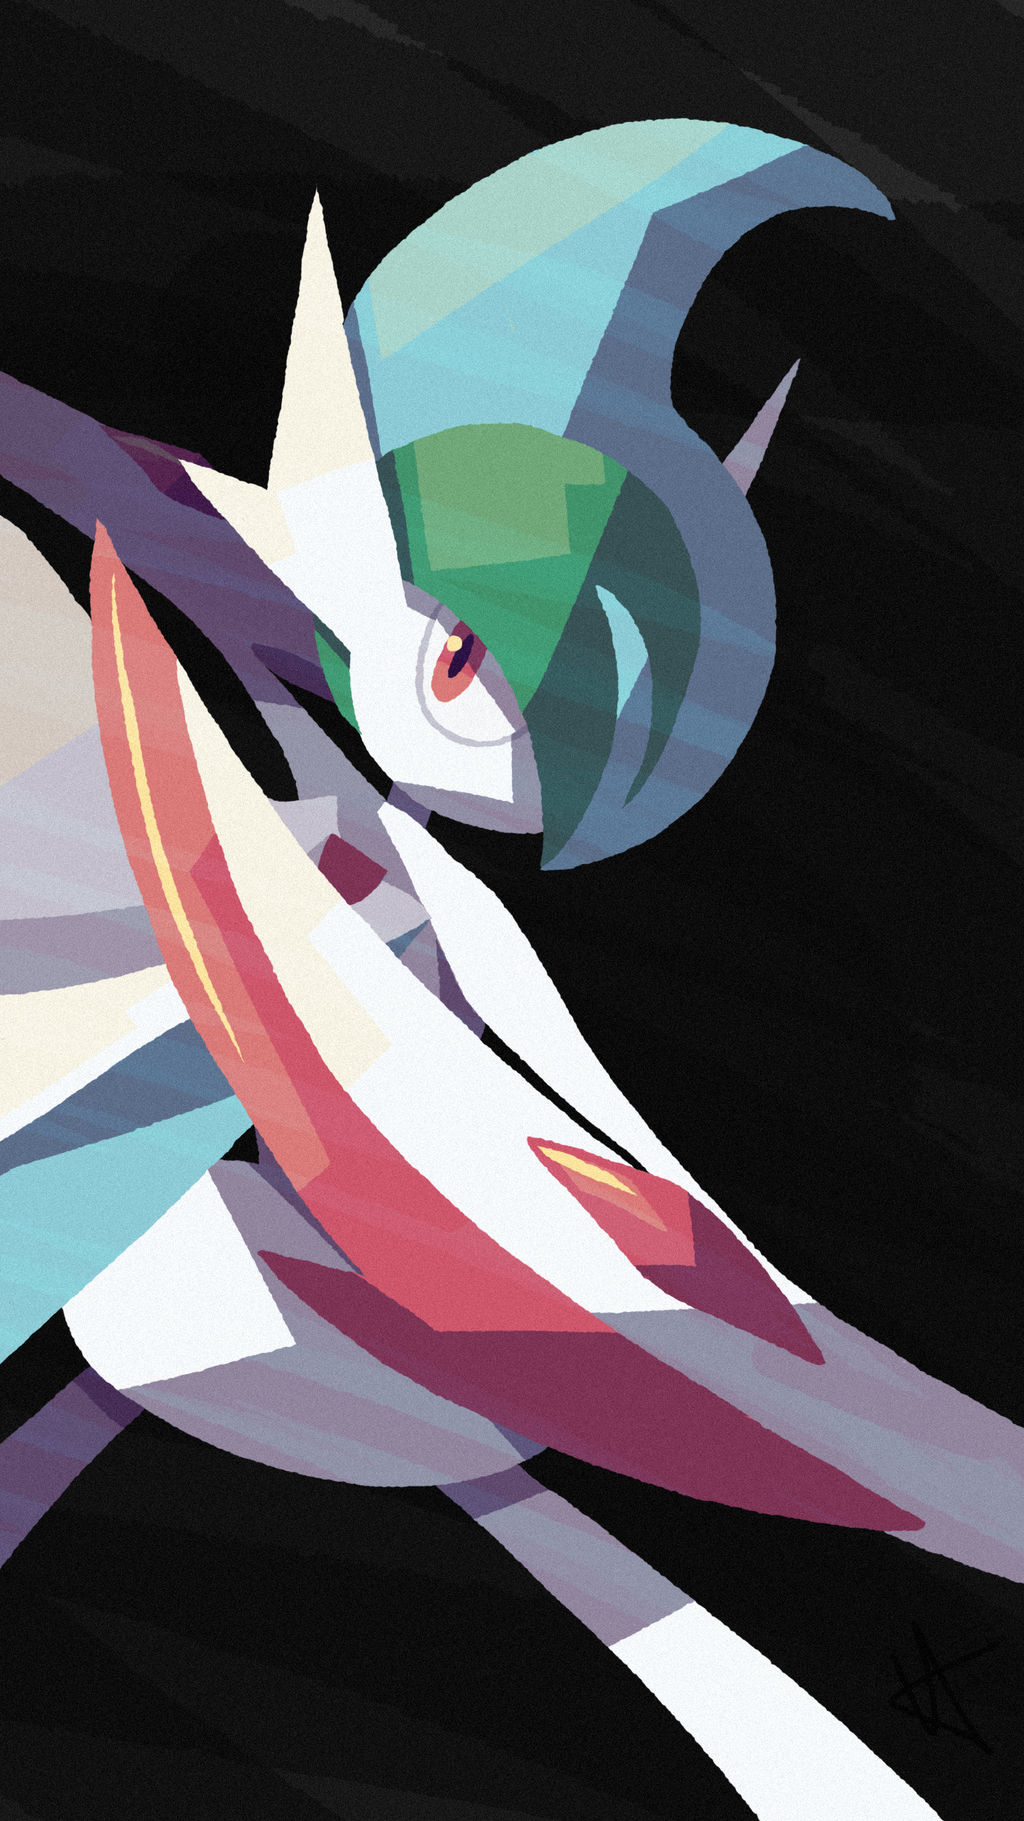 Gallade Wallpapers